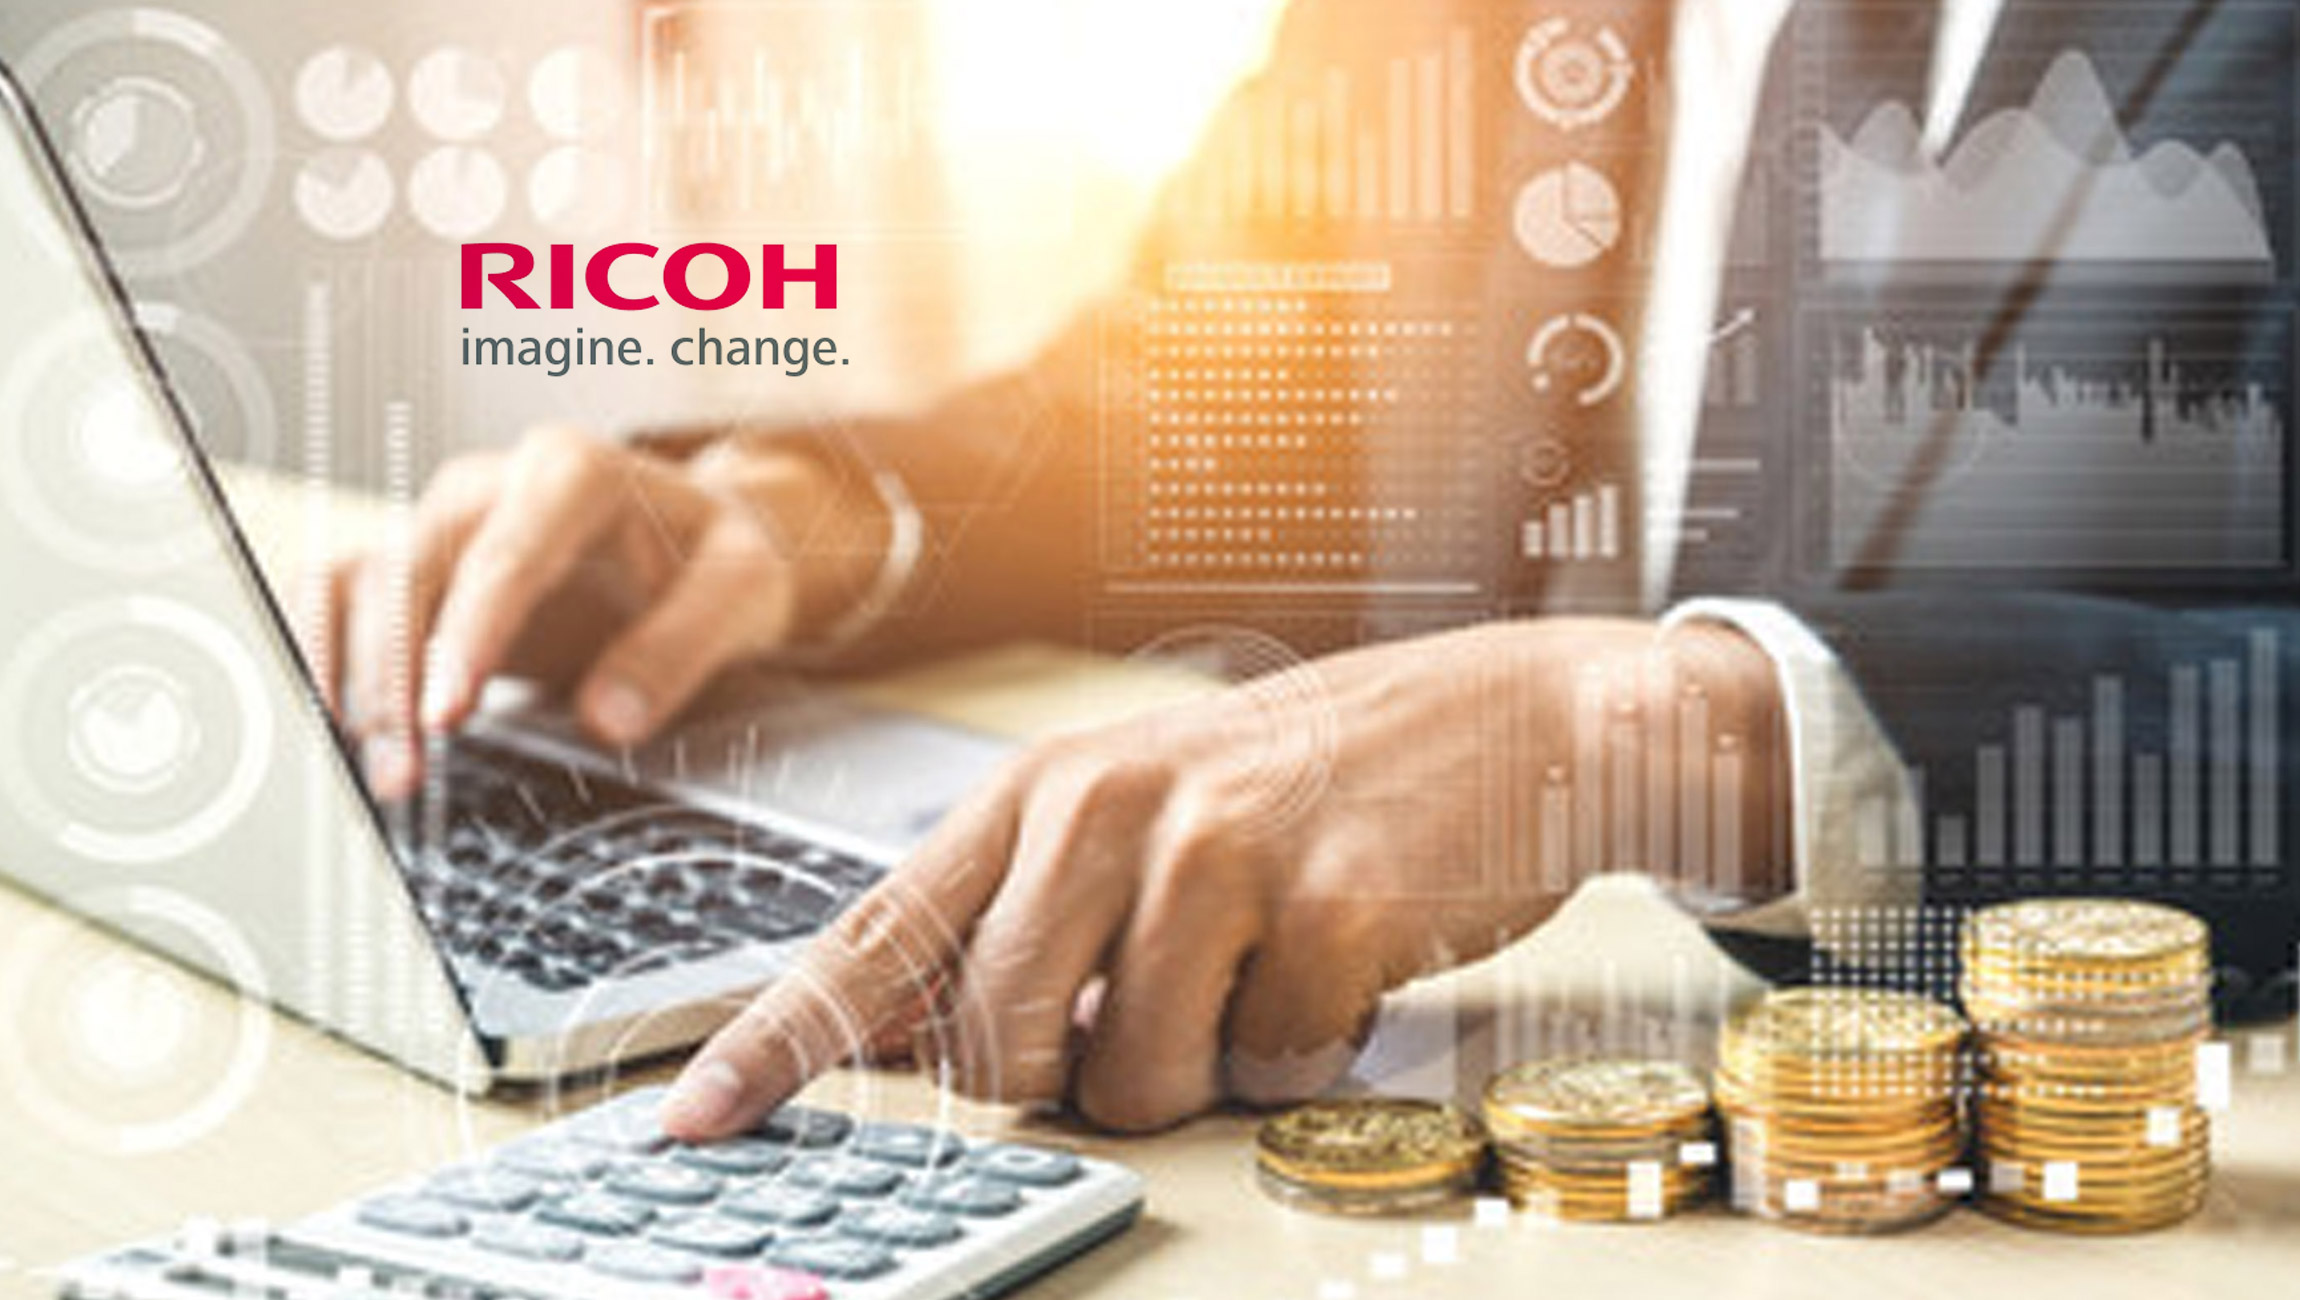 IDC Names Ricoh a 'Major Player' in the Revenue Cycle Management (RCM) Service Solutions Market